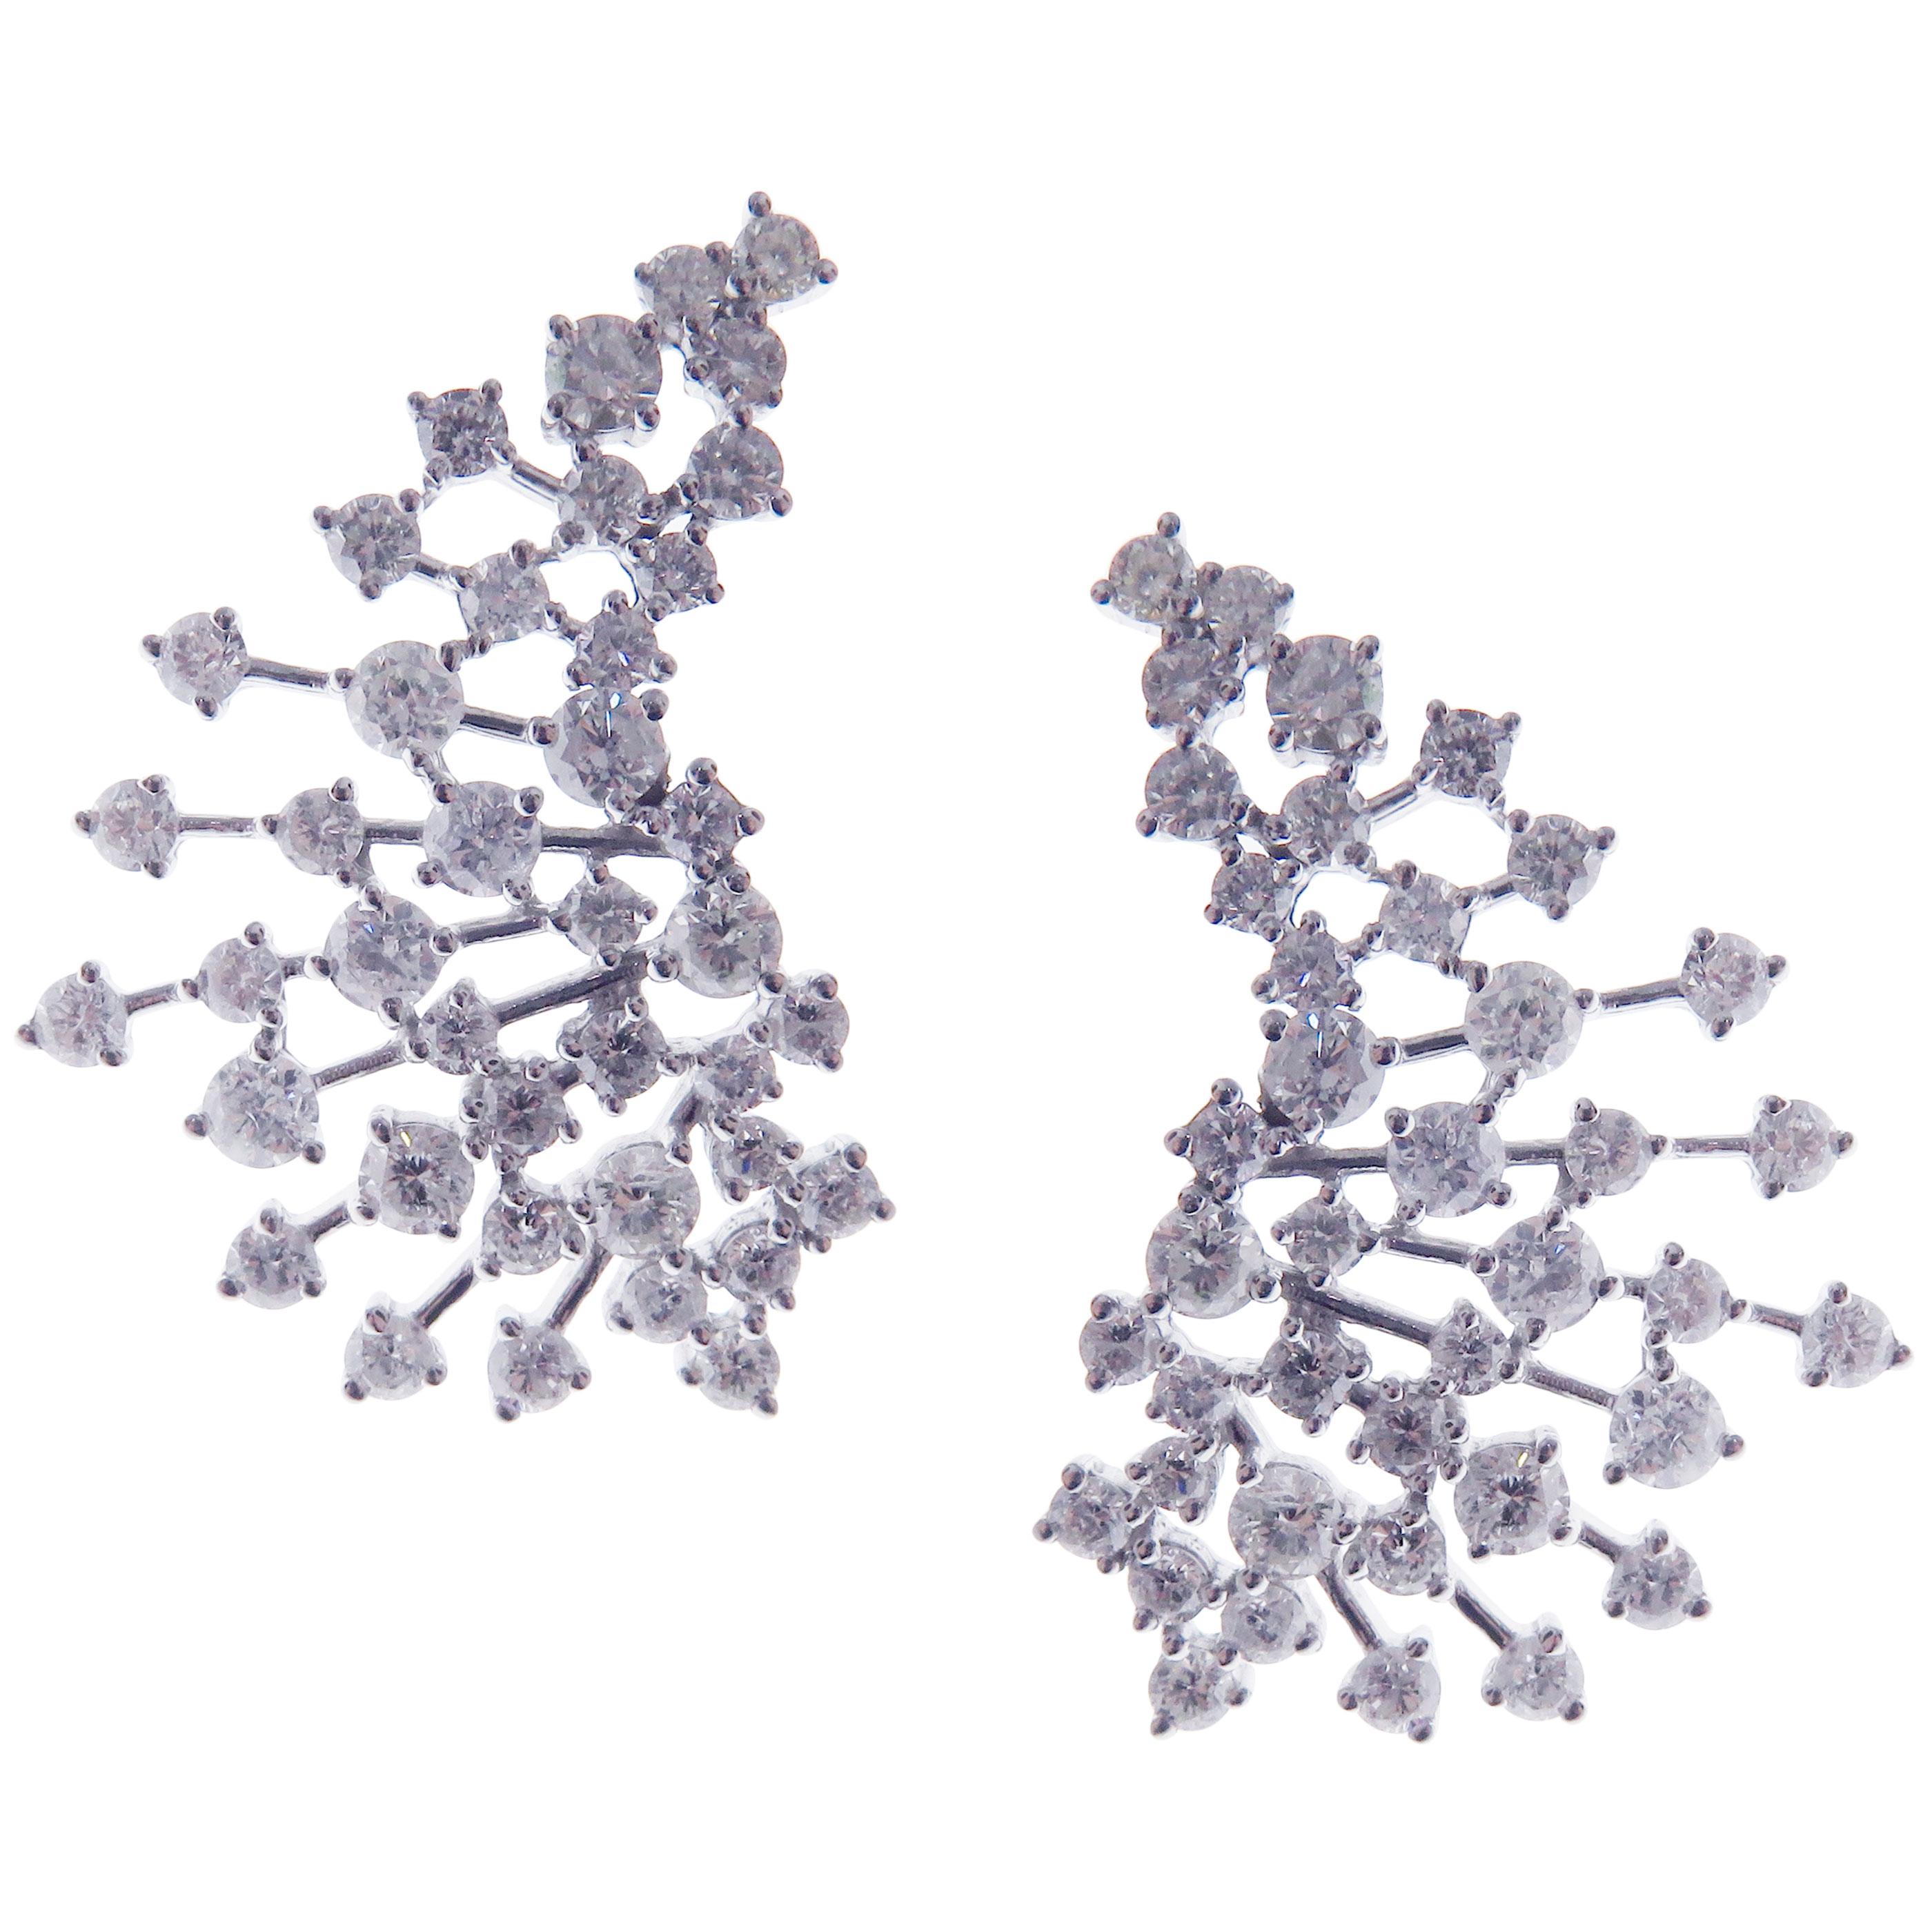 These trendy diamond wing crawler earrings with white diamonds are crafted in 18-karat white gold, featuring80 round white diamonds totaling of 3.26 carats.
18-karat yellow gold are also available upon request.
Approximately 1.05'' inches.
These